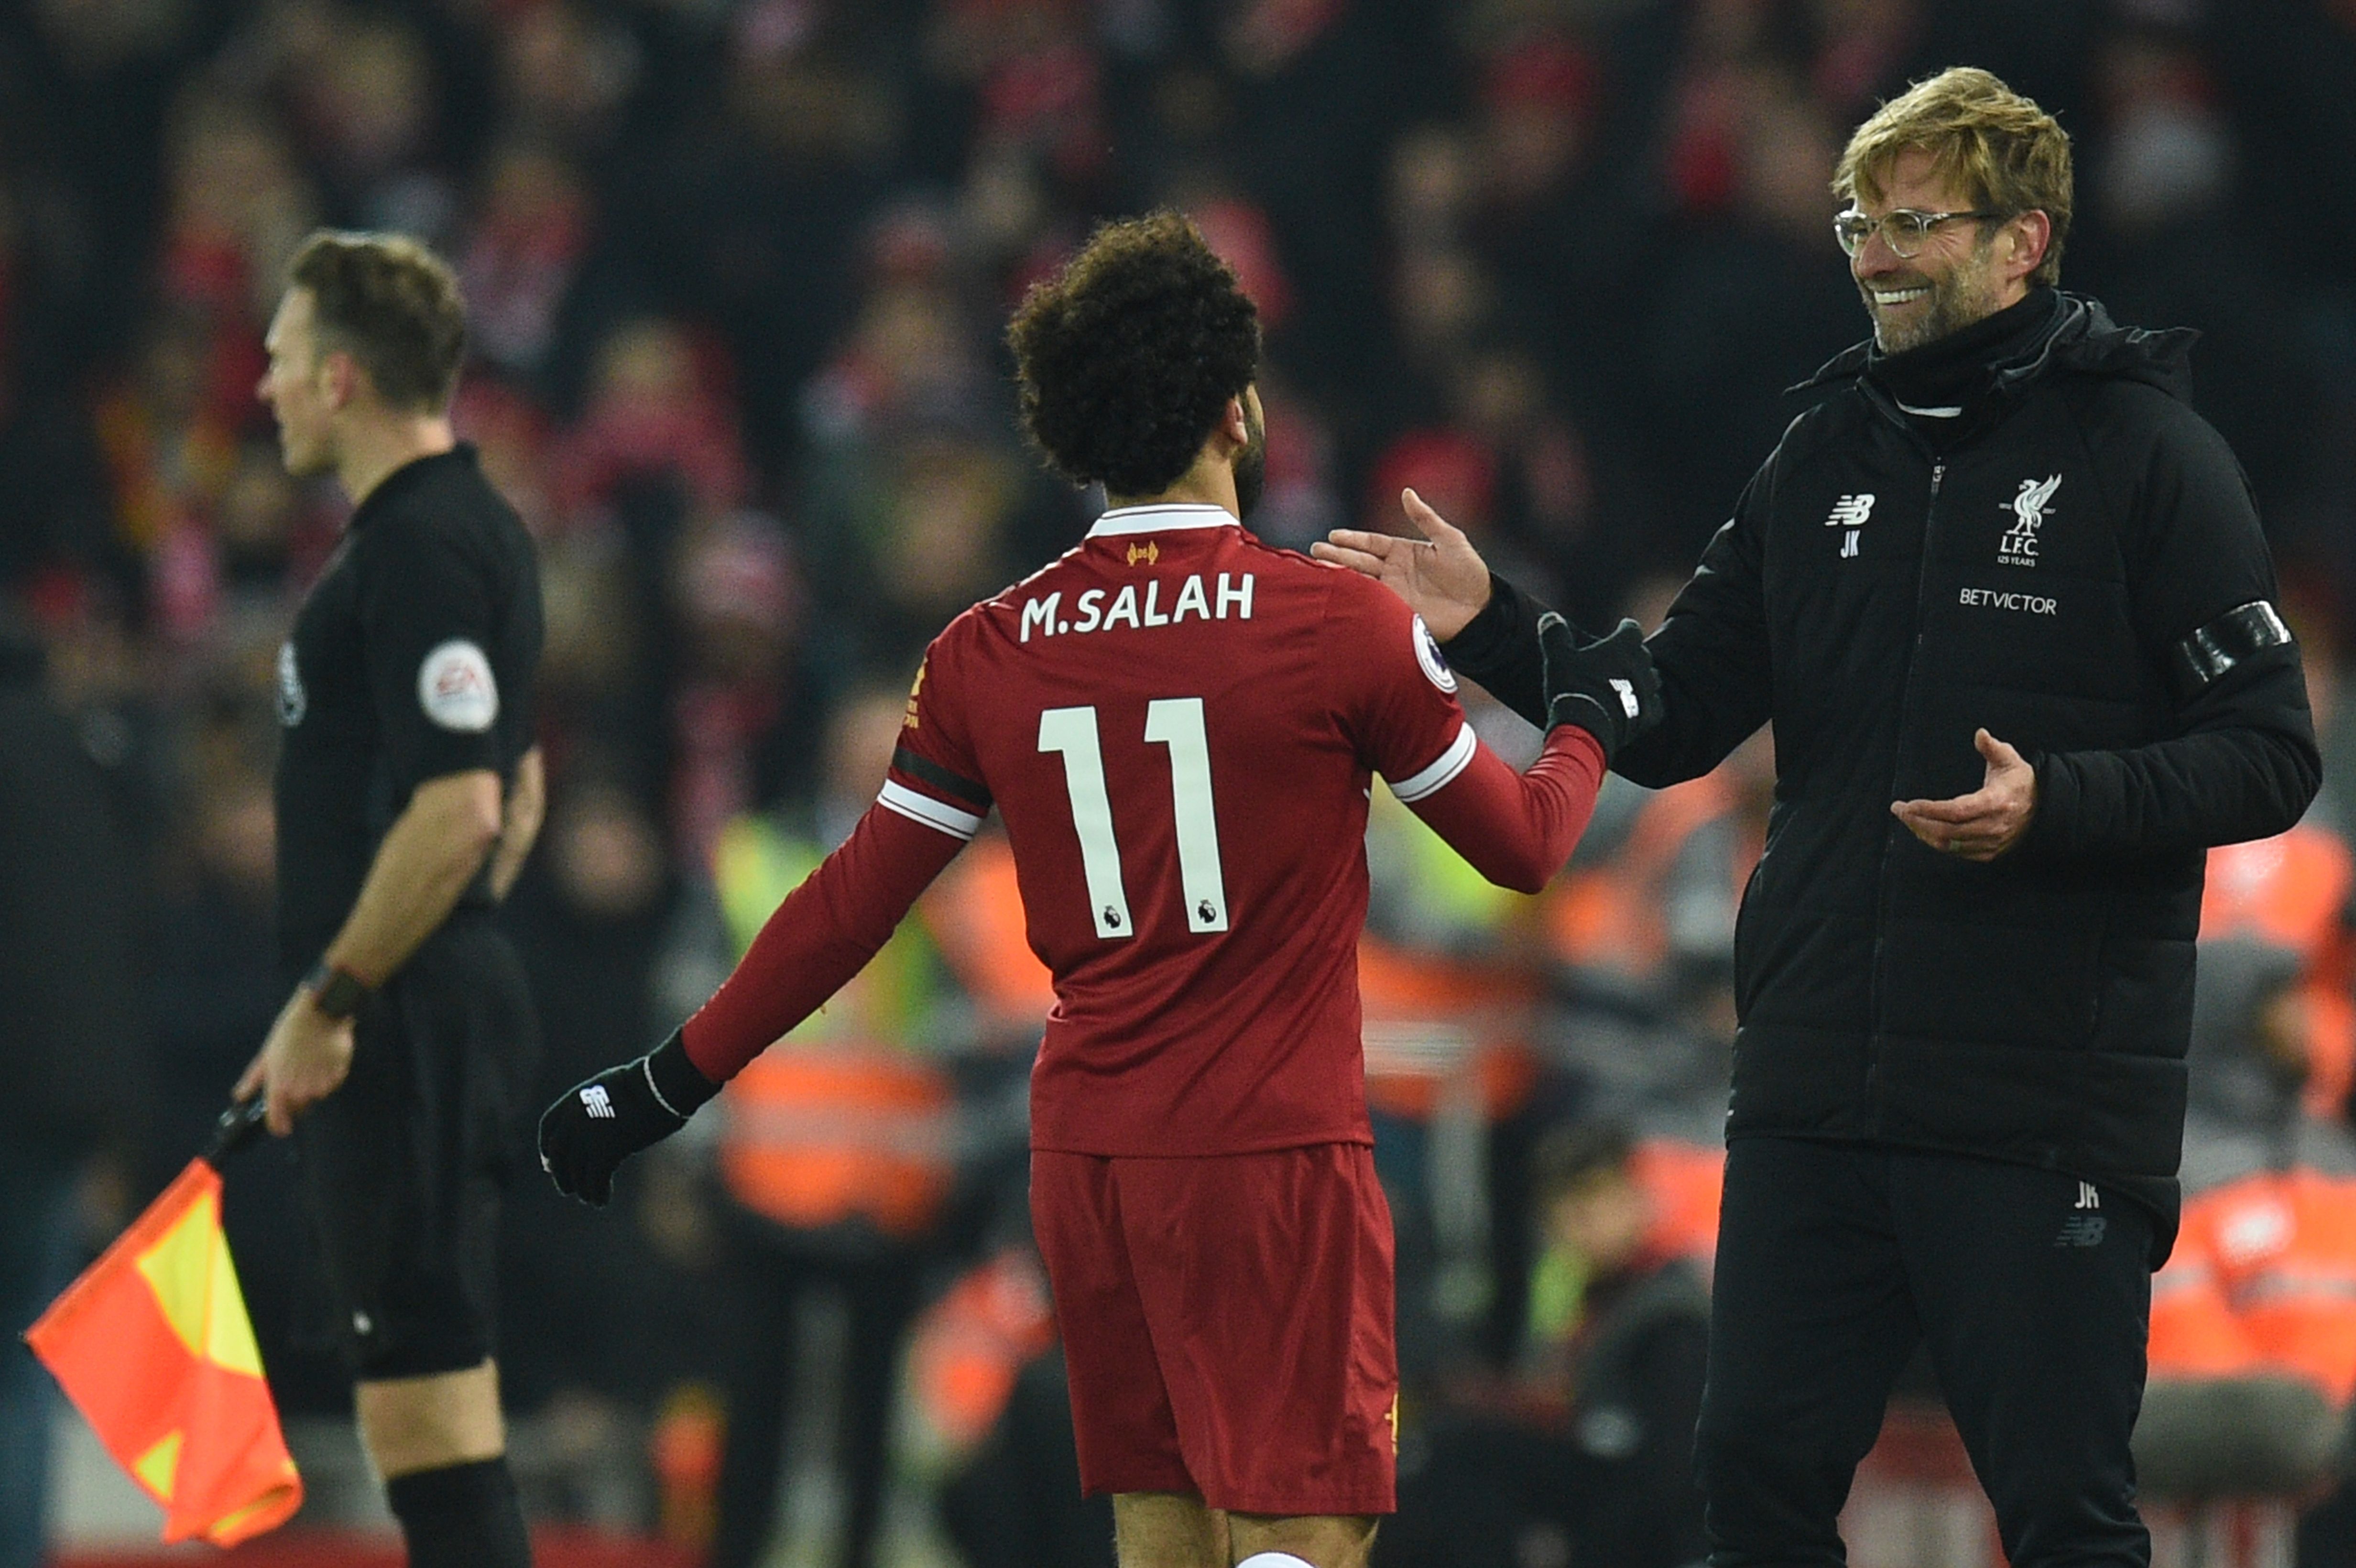 Liverpool's German manager Jurgen Klopp (R) greets Liverpool's Egyptian midfielder Mohamed Salah (L) as Salah comes off during the English Premier League football match between Liverpool and Manchester City at Anfield in Liverpool, north west England on January 14, 2018. / AFP PHOTO / Oli SCARFF / RESTRICTED TO EDITORIAL USE. No use with unauthorized audio, video, data, fixture lists, club/league logos or 'live' services. Online in-match use limited to 75 images, no video emulation. No use in betting, games or single club/league/player publications.  /         (Photo credit should read OLI SCARFF/AFP/Getty Images)